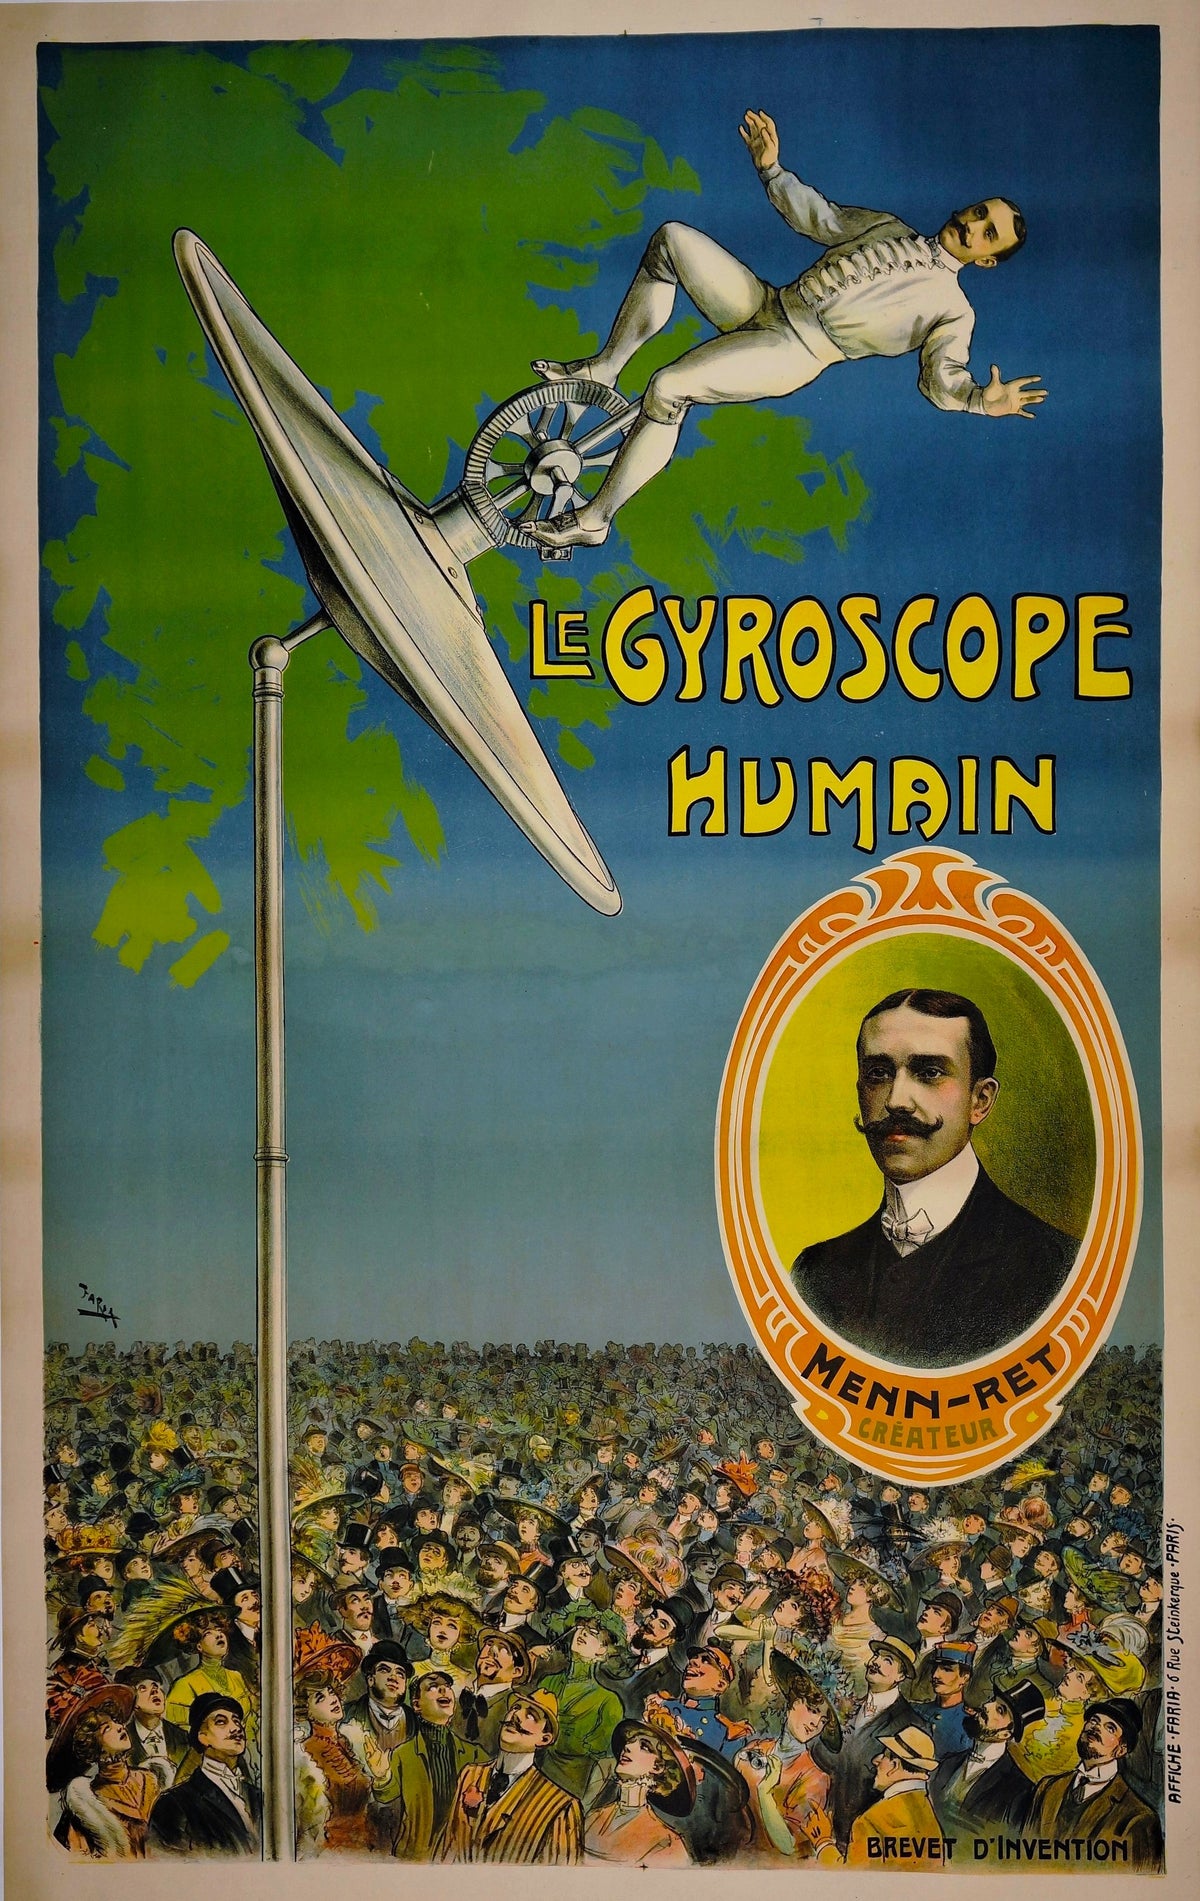 Le Gyroscope Humain - Authentic Vintage Poster